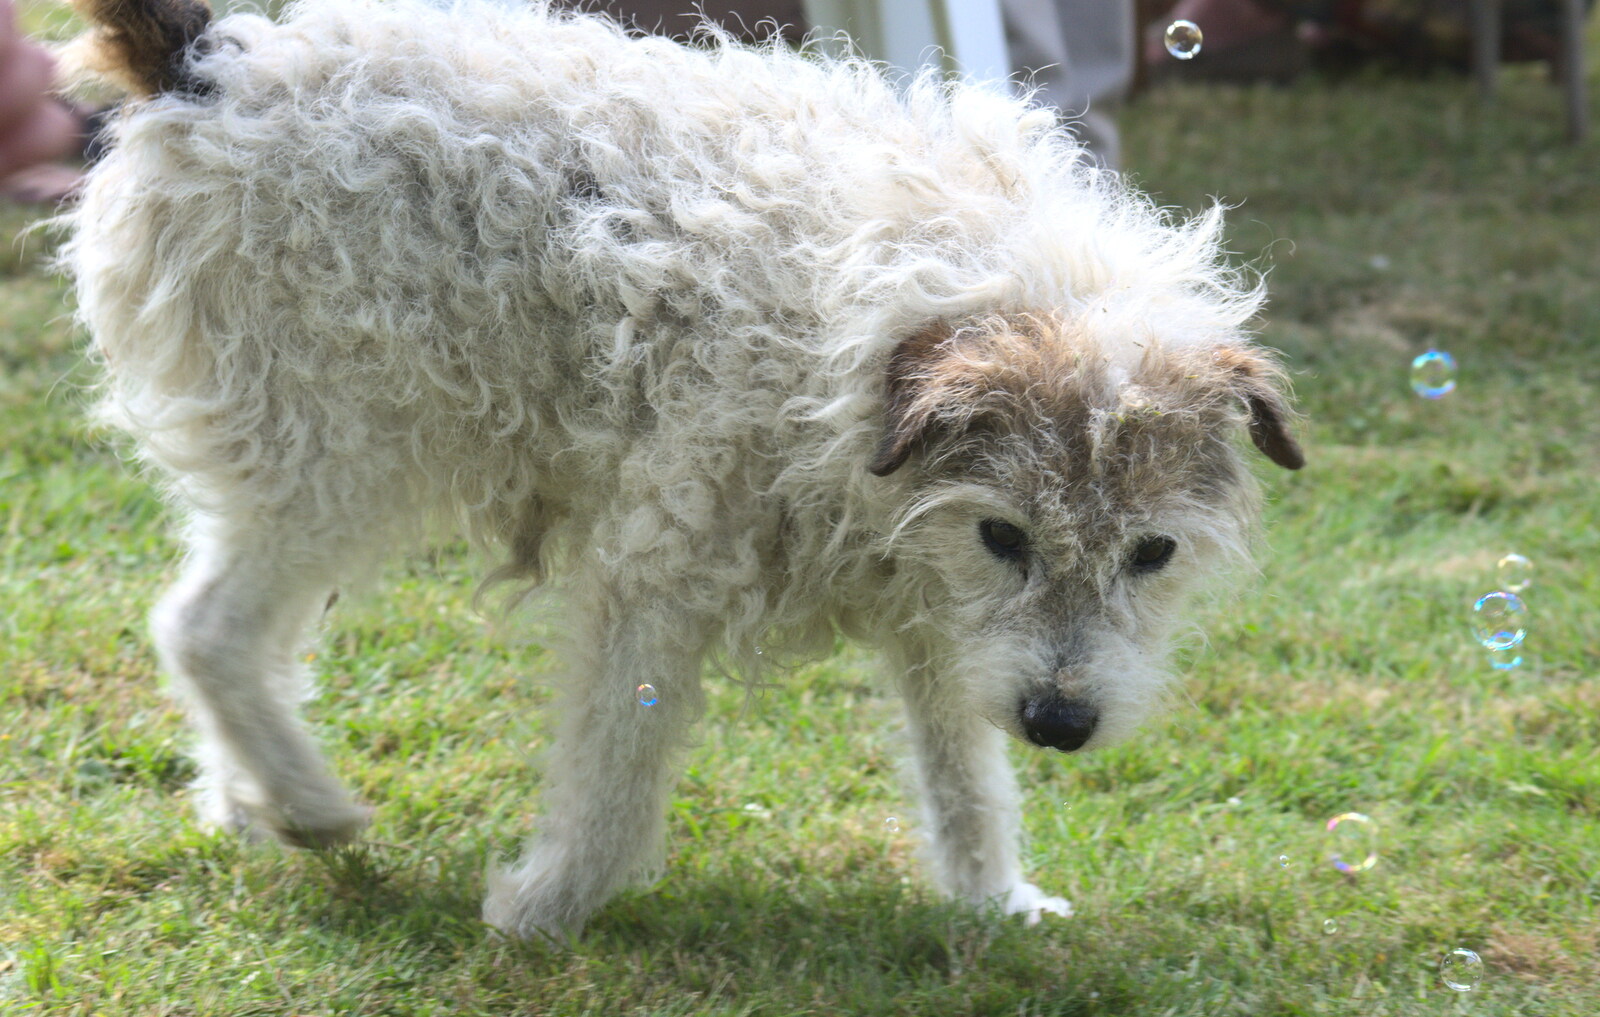 A wooly dog roams around from Marconi's Demolition and Brome Village Fete, Chelmsford and Brome, Suffolk - 6th July 2013